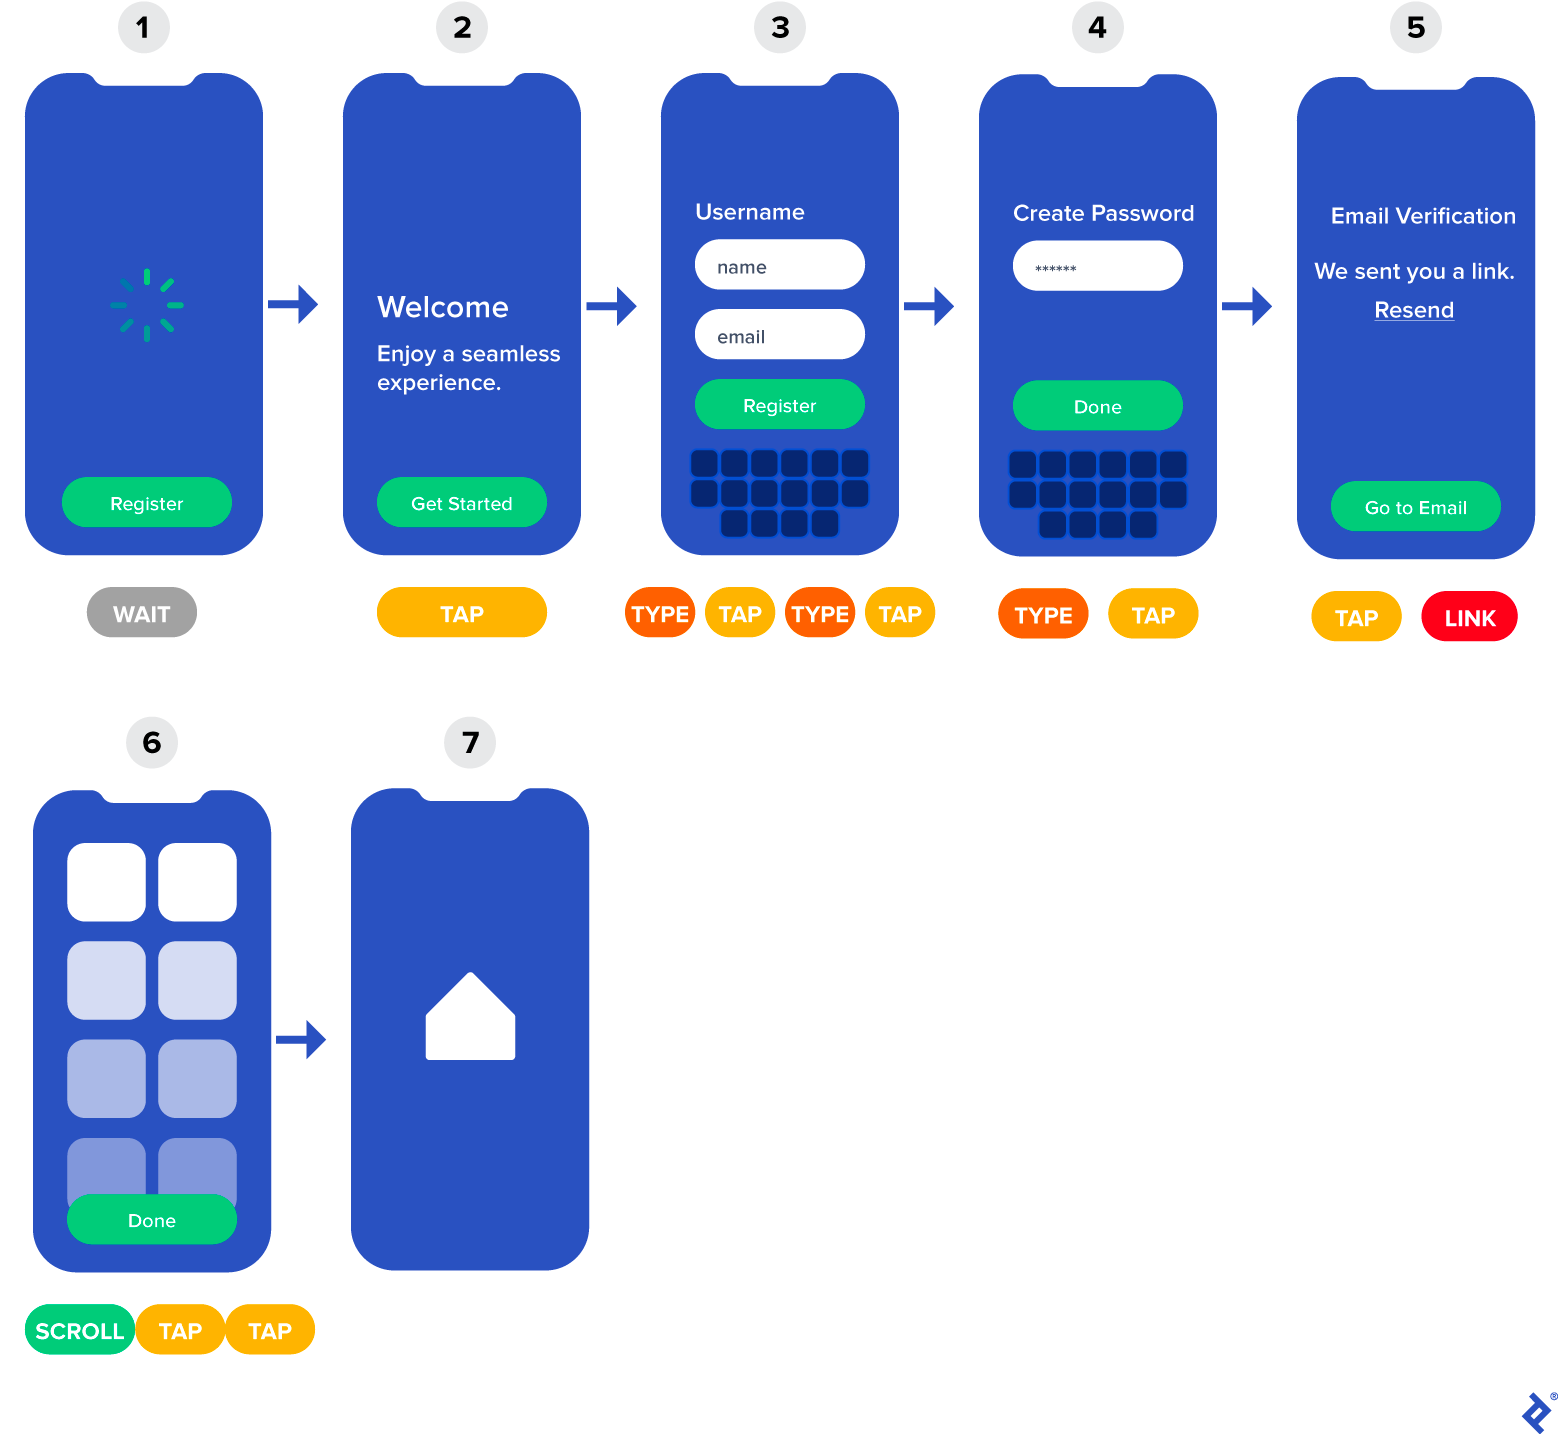 The onboarding user flow for the app is condensed into seven screens. Below each screen are action labels involved in the step: wait, scroll, tap, type, or link. The welcome screen includes one of the app’s benefits (“enjoy a seamless experience”) and the username and email address fields have been combined into one screen.